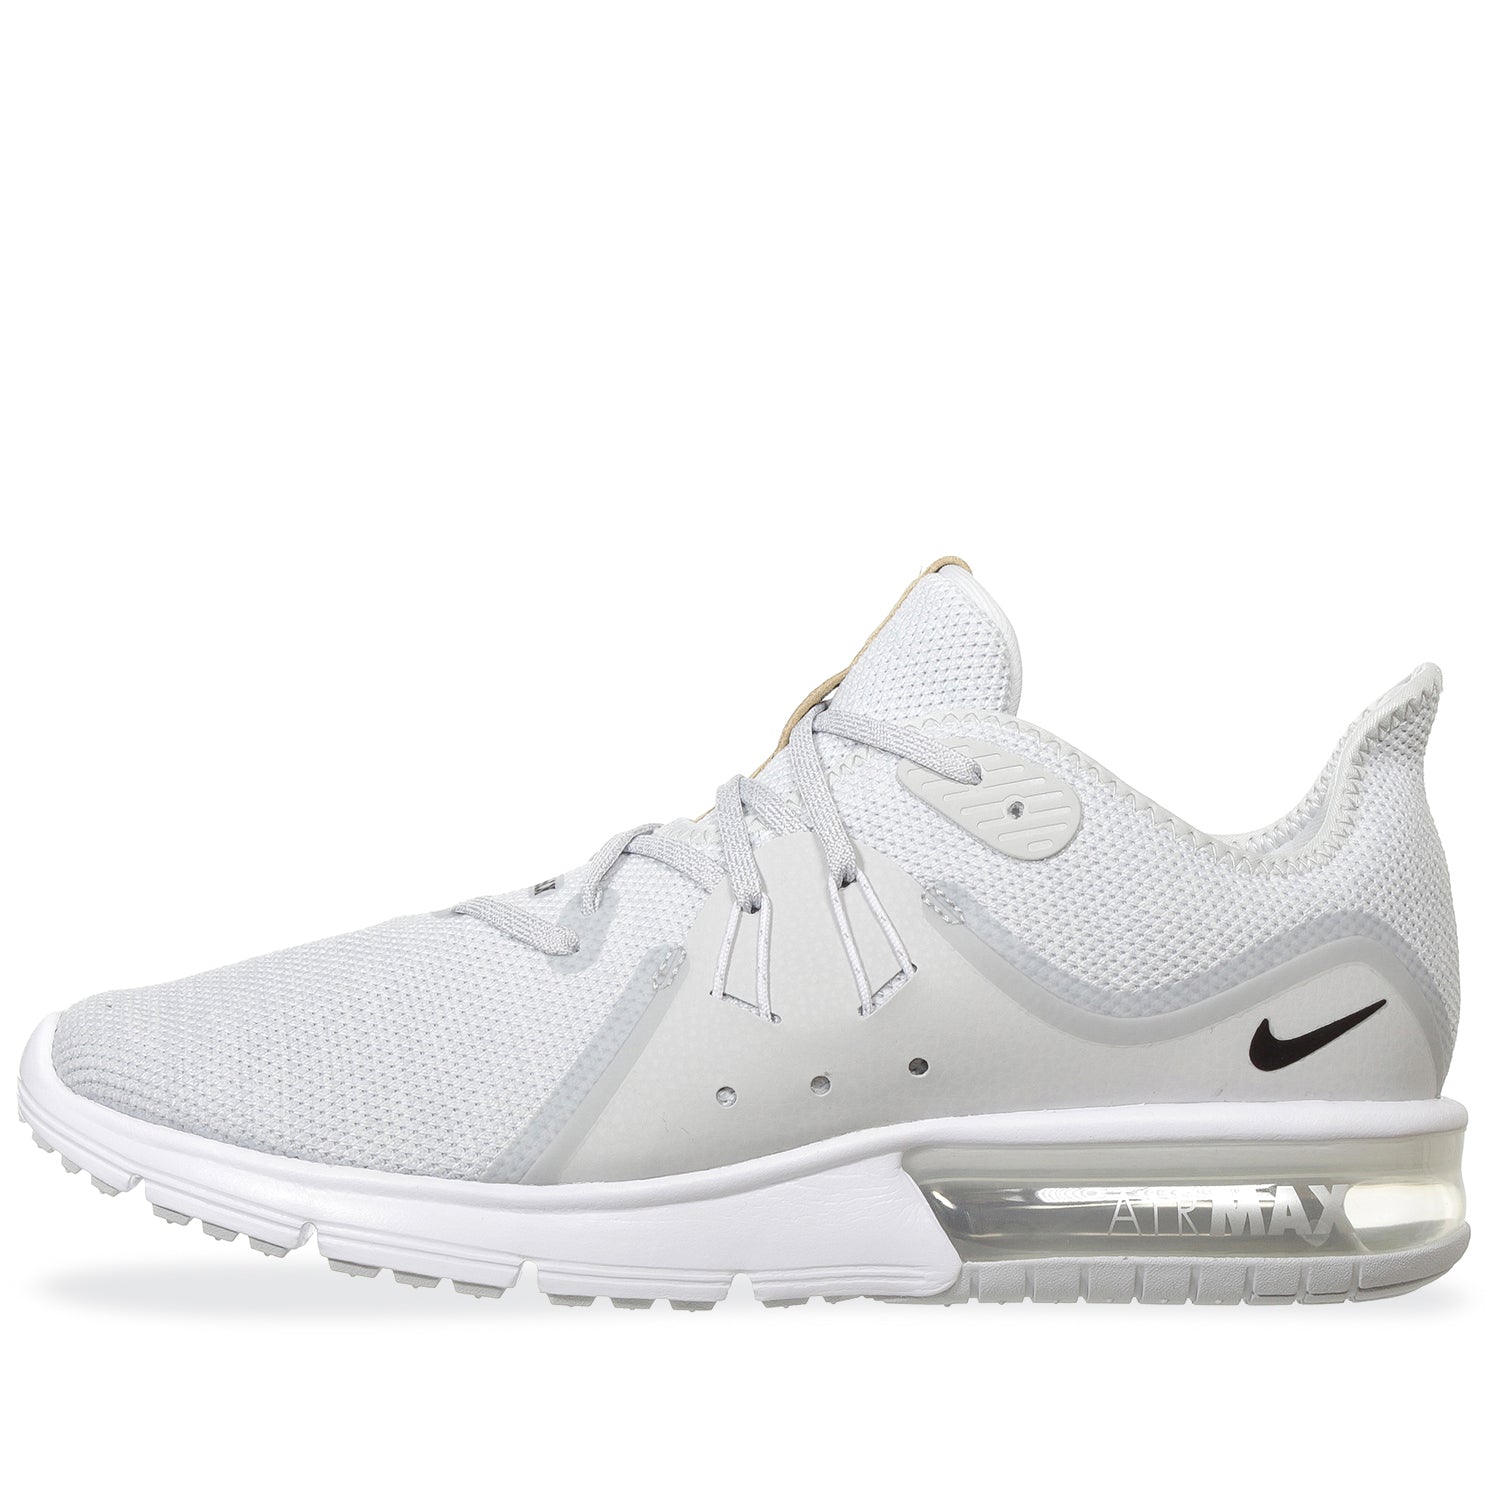 Tenis Nike Air Max Sequent - 921694008 - Gris - Hombre | - Retail